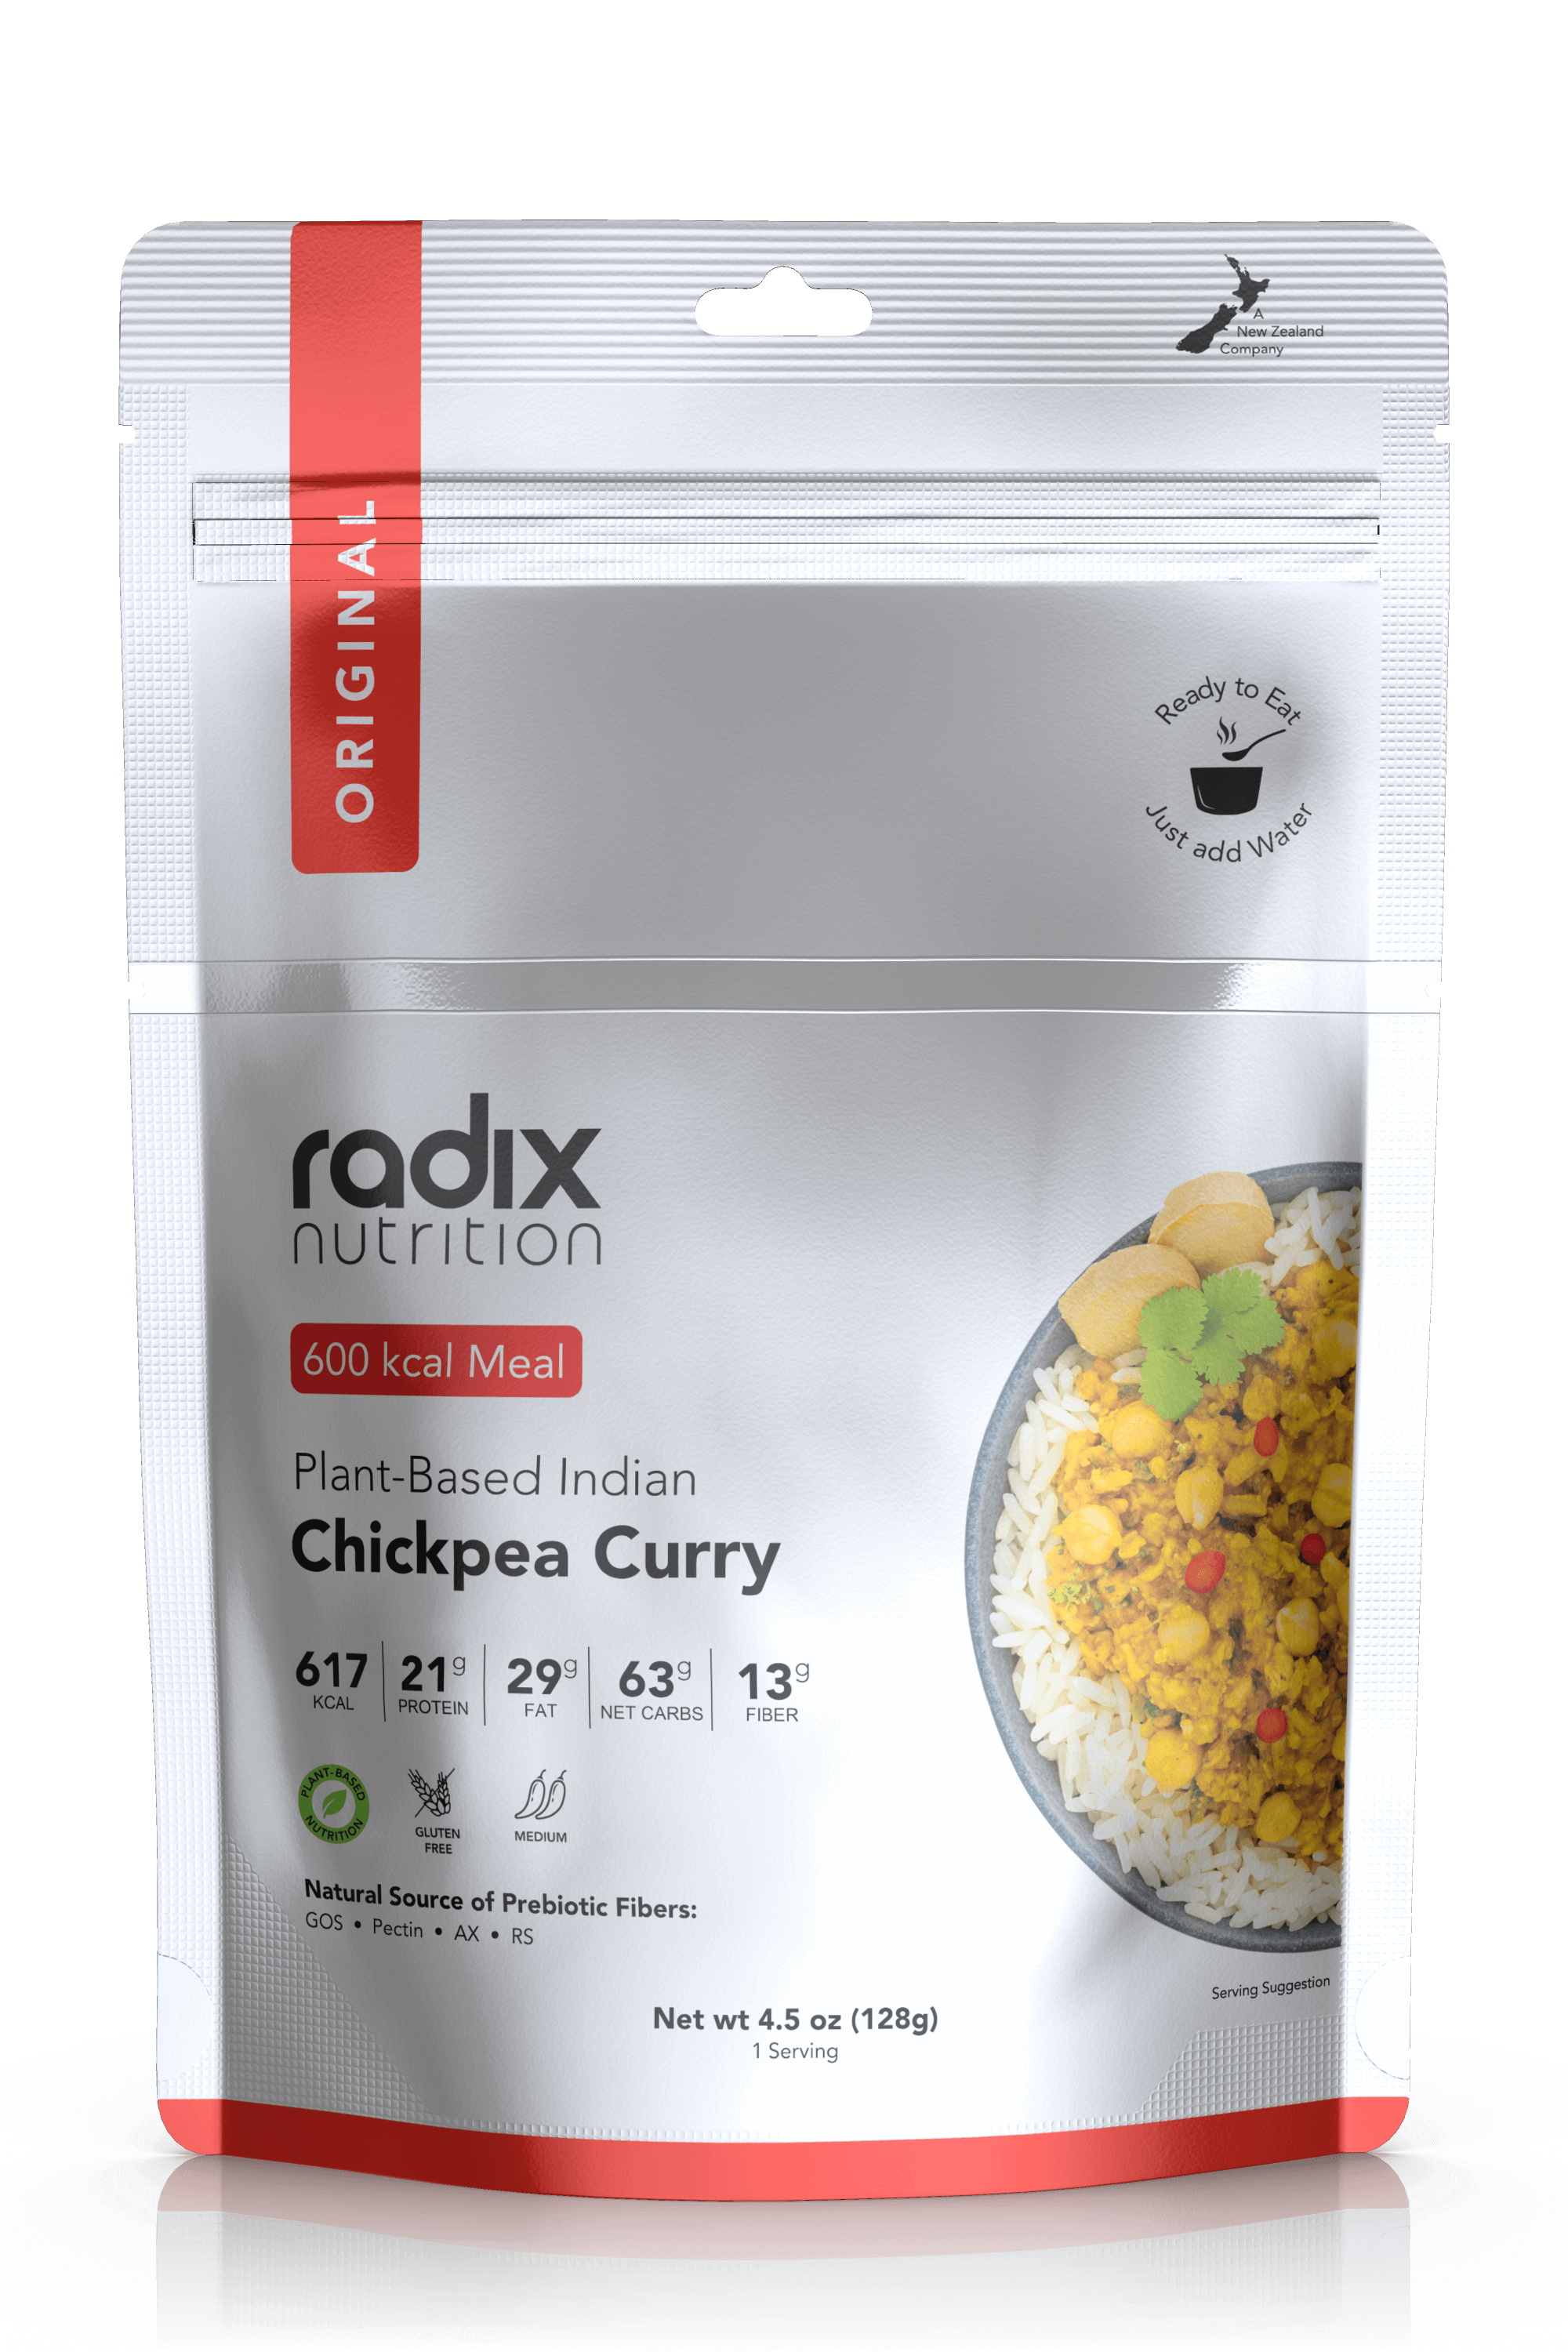 Radix Nutrition Original 600 Plant-Based Indian Chickpea Curry V7 - Tramping Food and Accessories sold by Venture Outdoors NZ